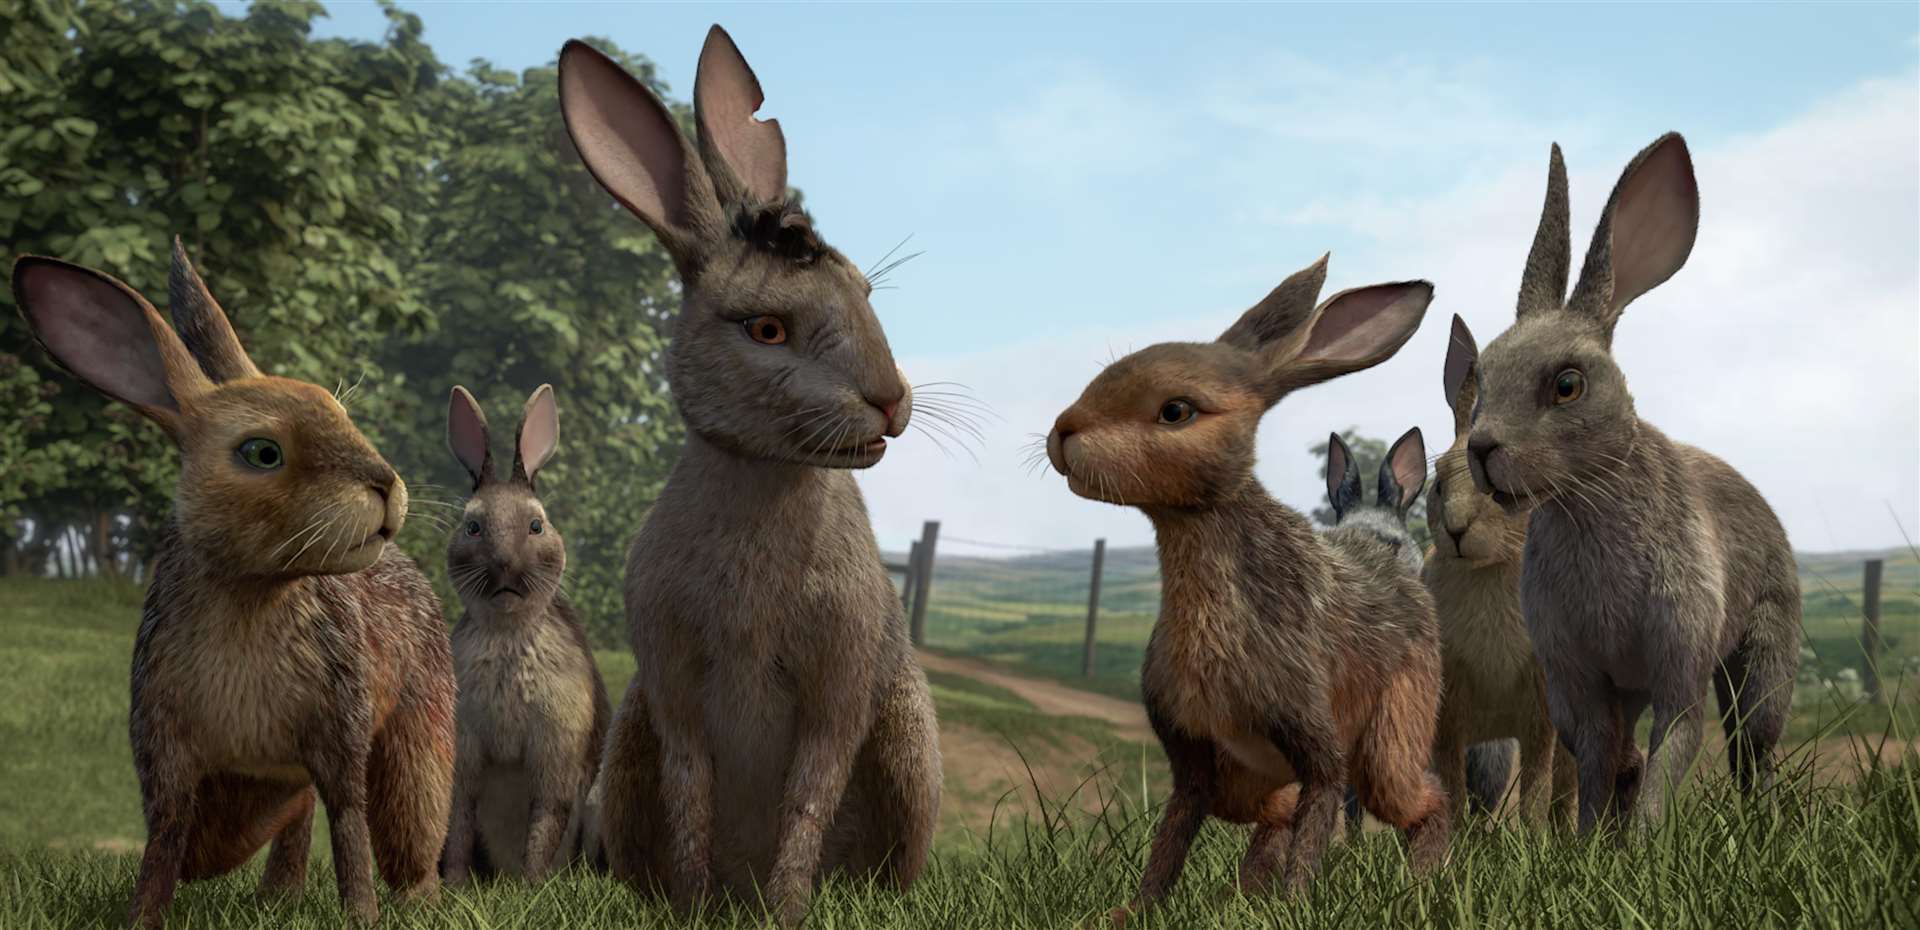 Fiver convinces Bigwig to follow his plan and head for Watership Down in the new BBC and Netflix adaptation on BBC1 this Christmas Picture: Watership Down